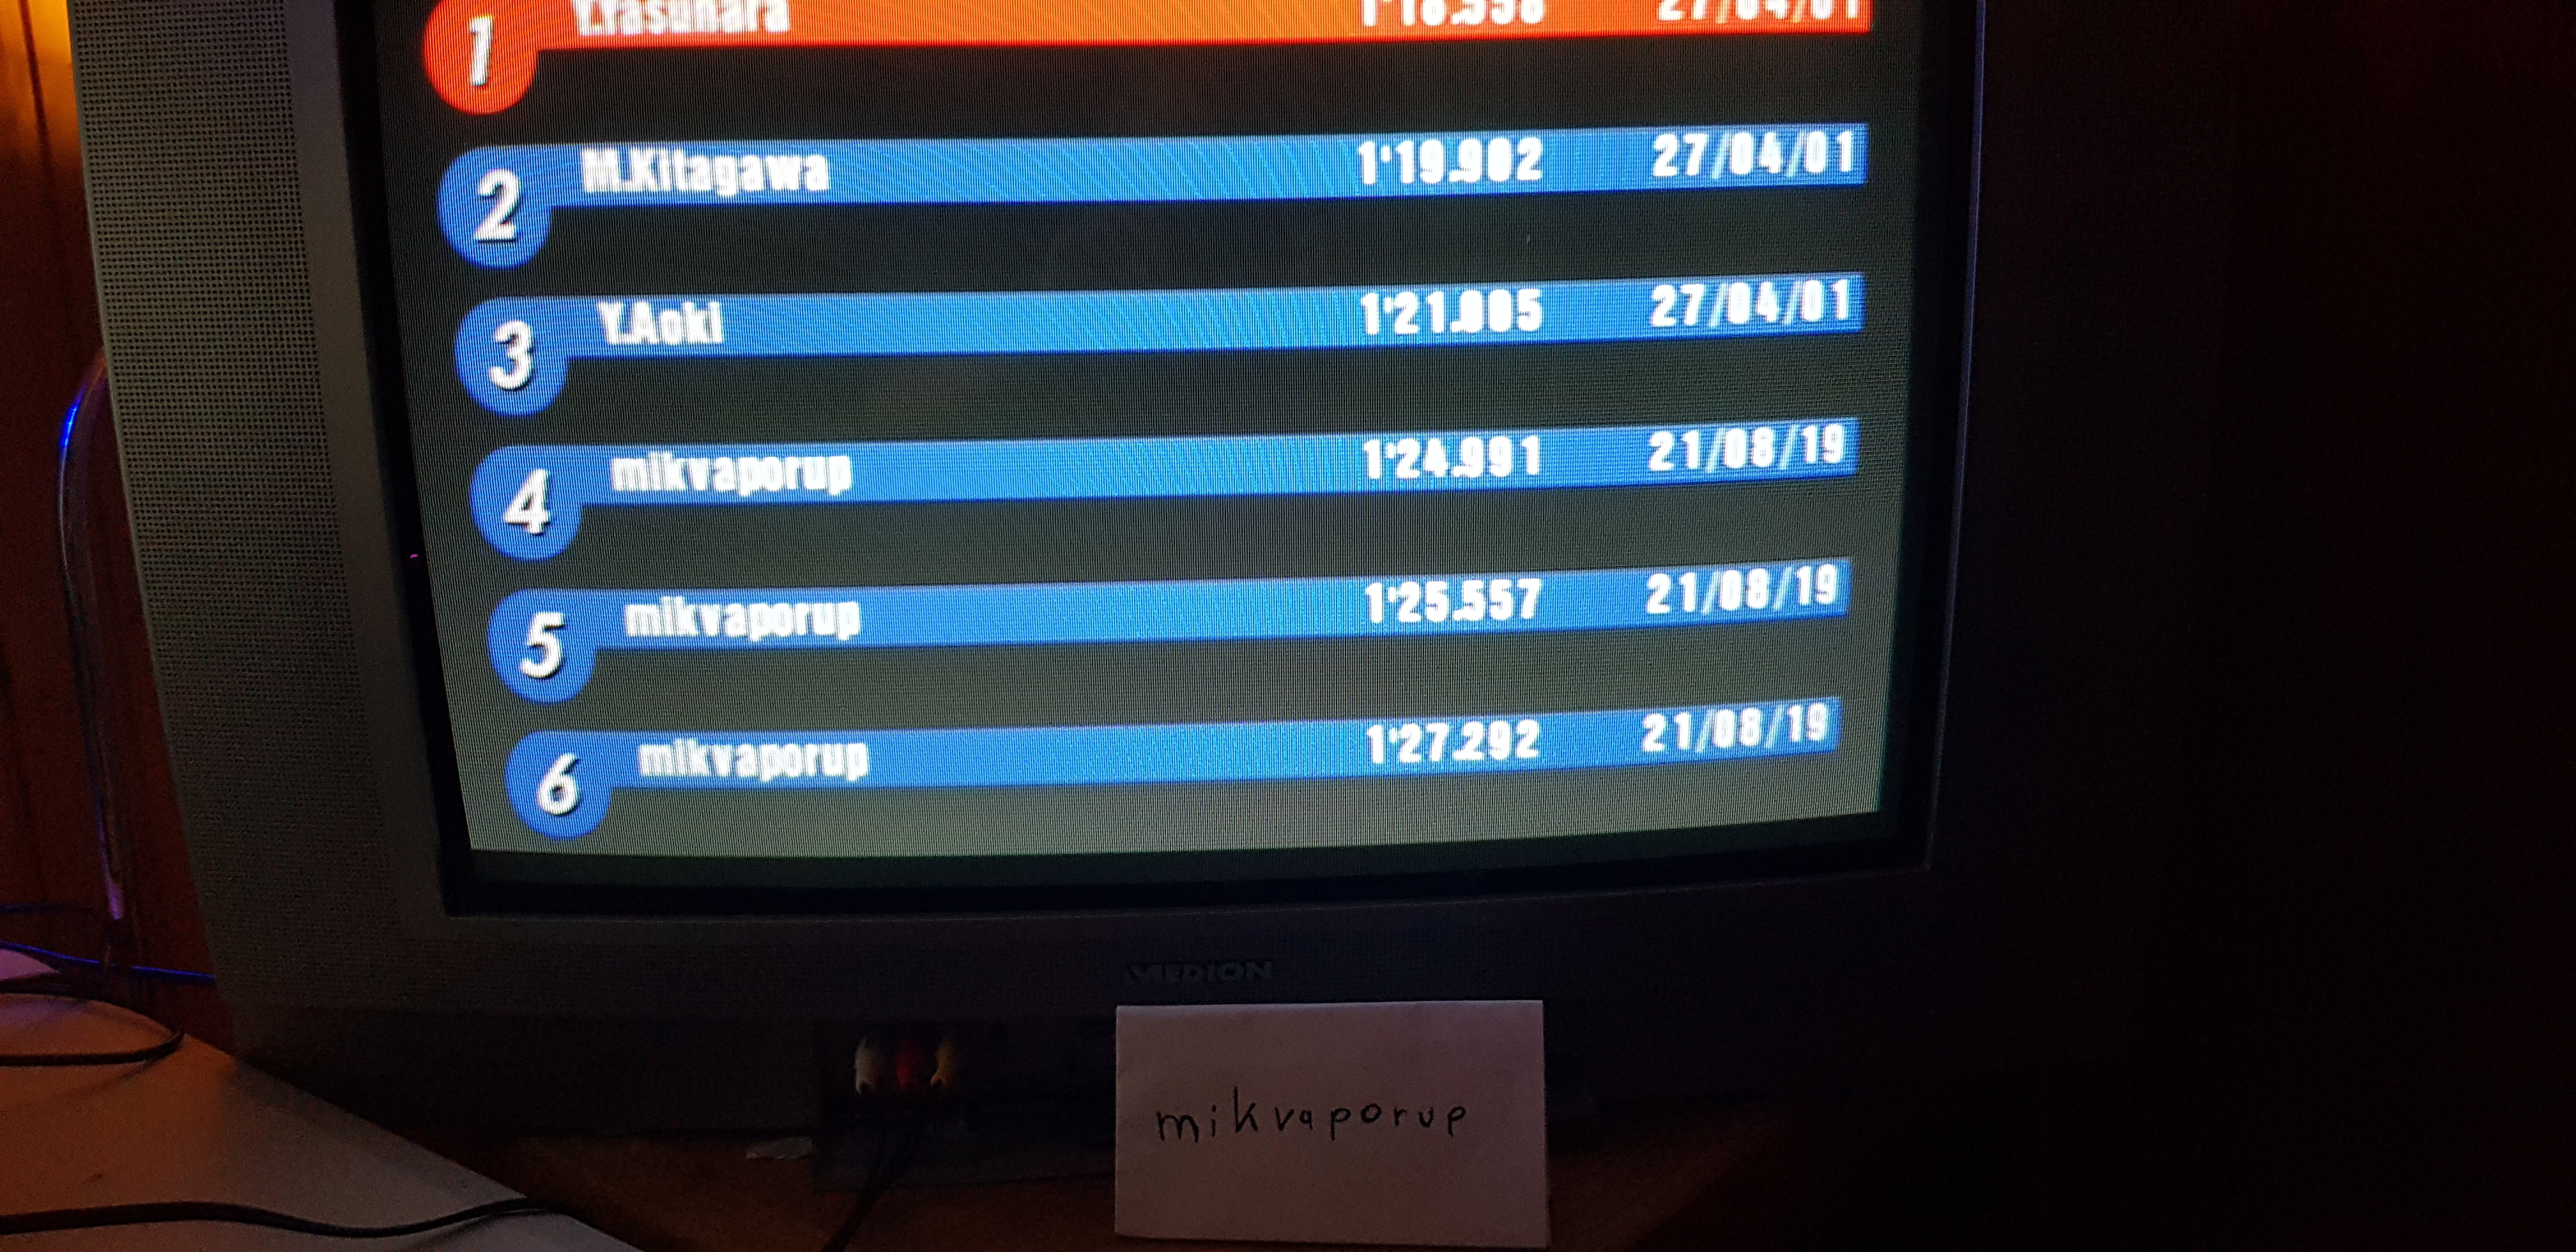 Gran Turismo 3: A-Spec [Time Trial] [Apricot Hill Raceway] time of 0:01:24.991